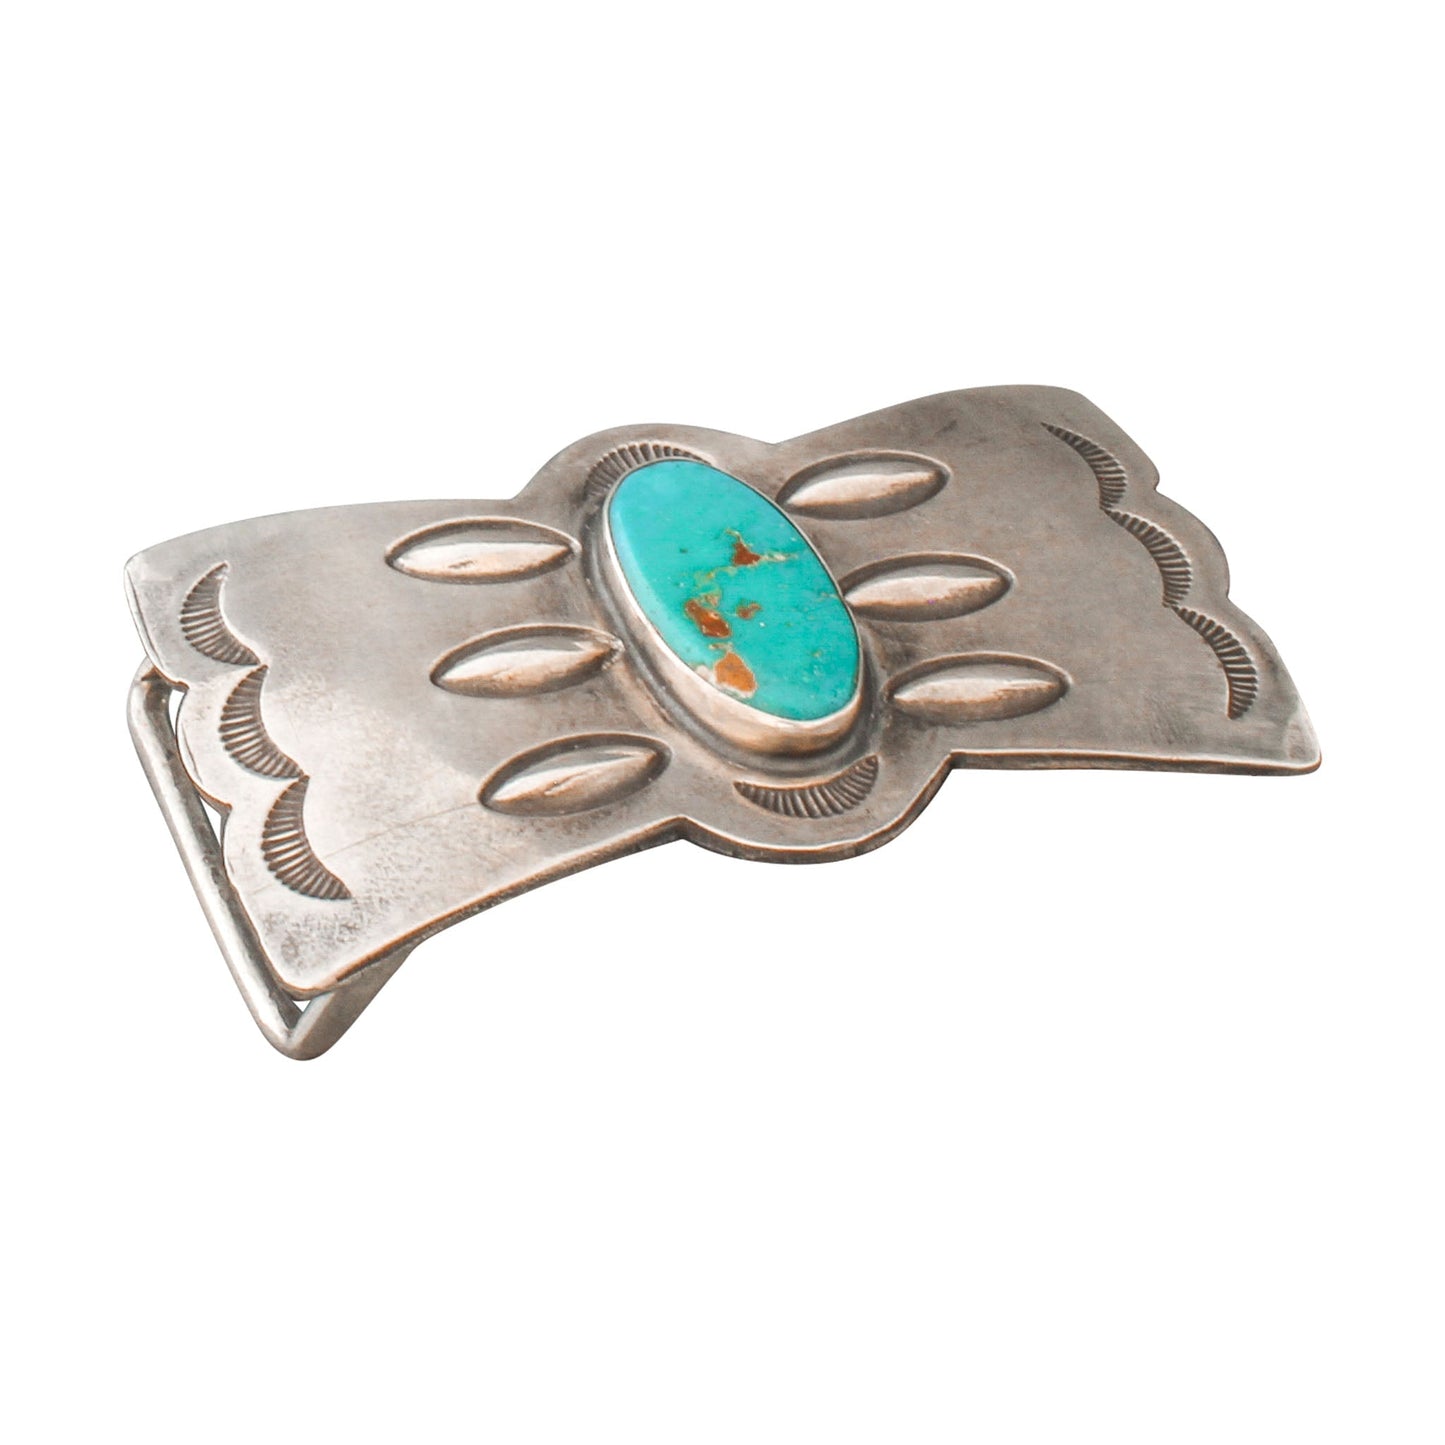 Vintage Navajo Silver Belt Buckle With Natural Blue Gem Turquoise - Turquoise & Tufa